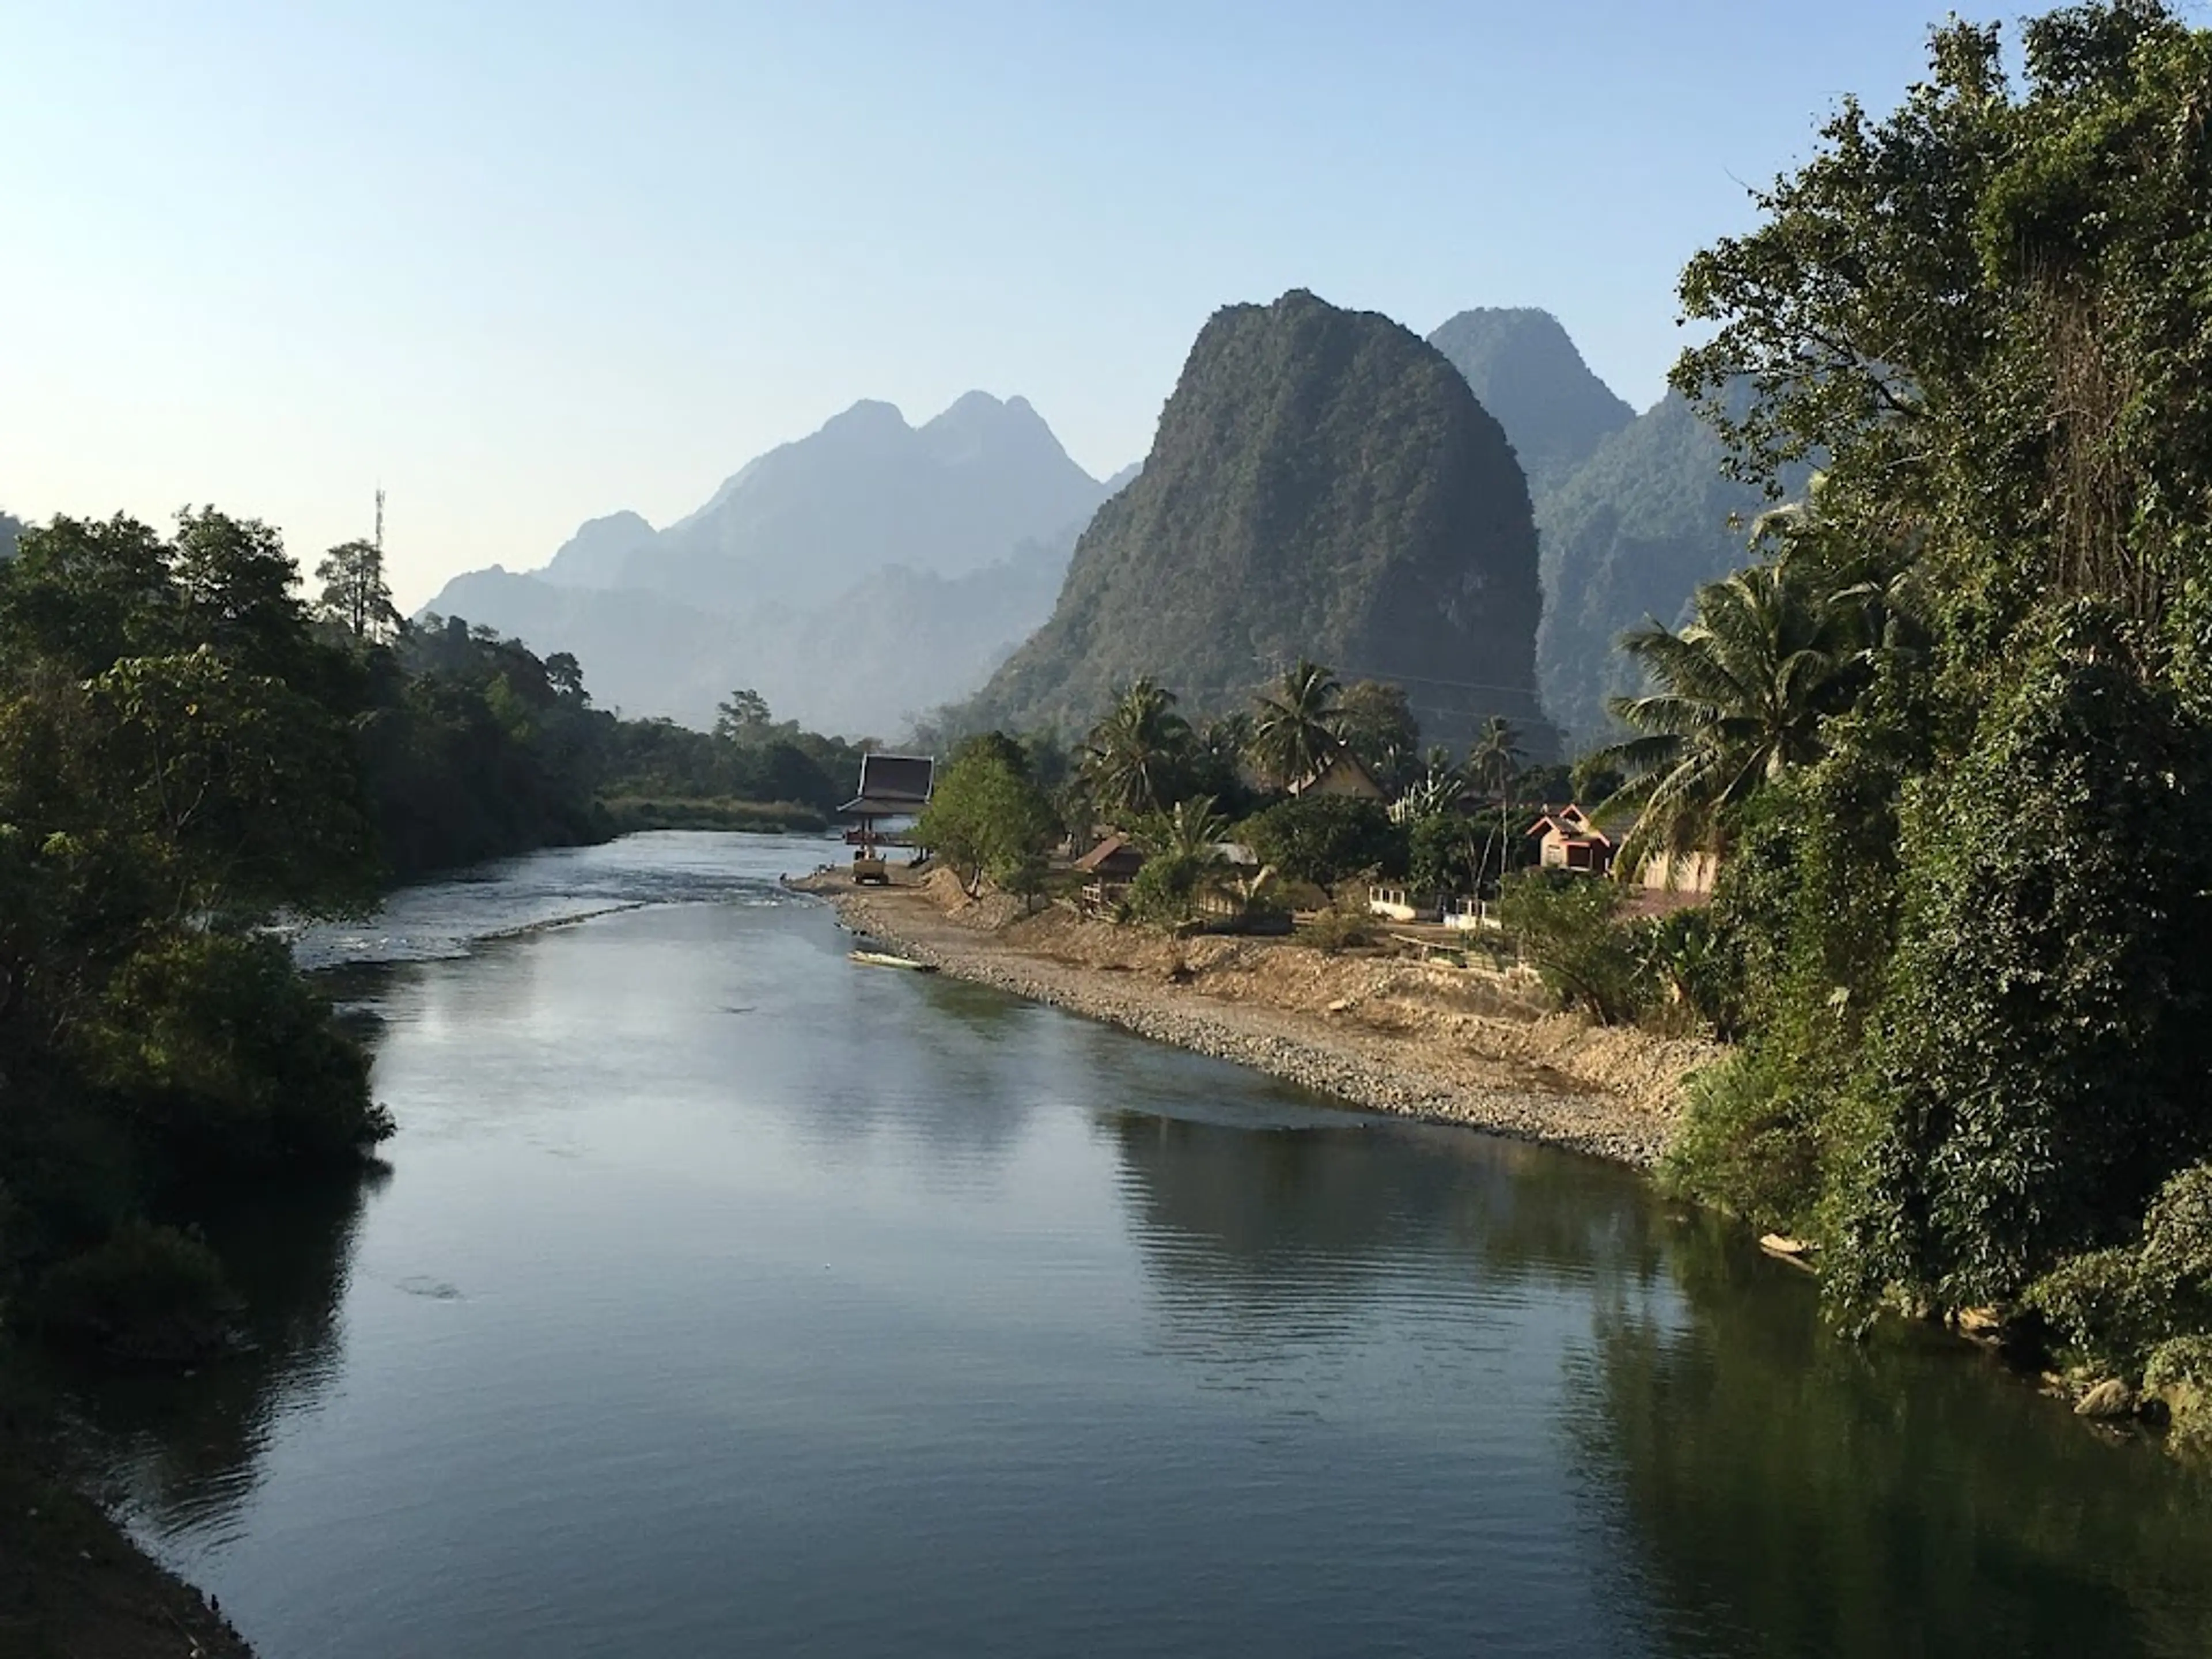 Kayaking on the Nam Song River